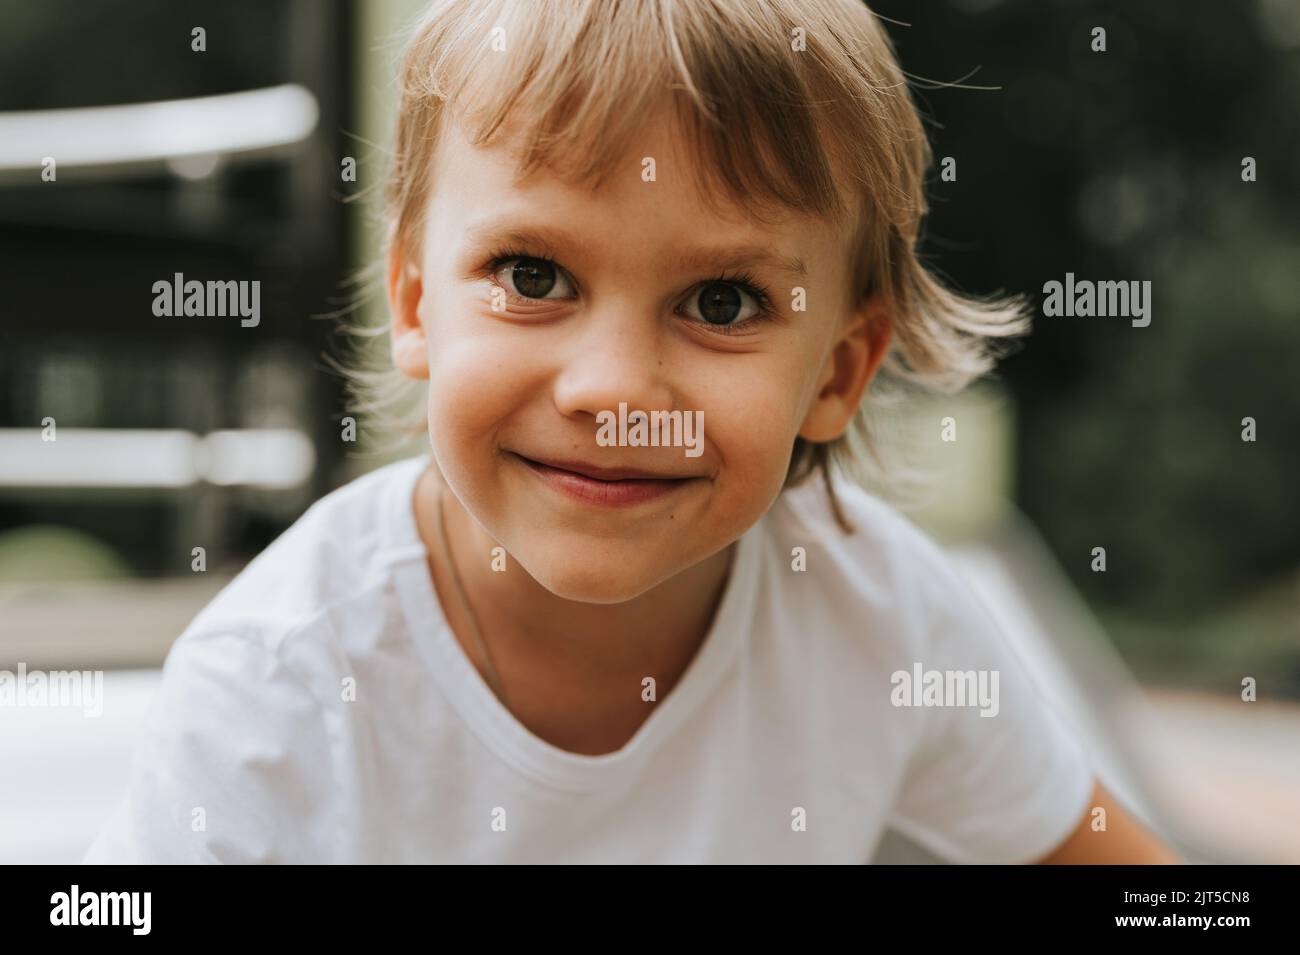 portrait of the face of a cute little happy smiling candid five year old kid boy with big eyes and long blond hair in a white t-shirt. generation z ch Stock Photo